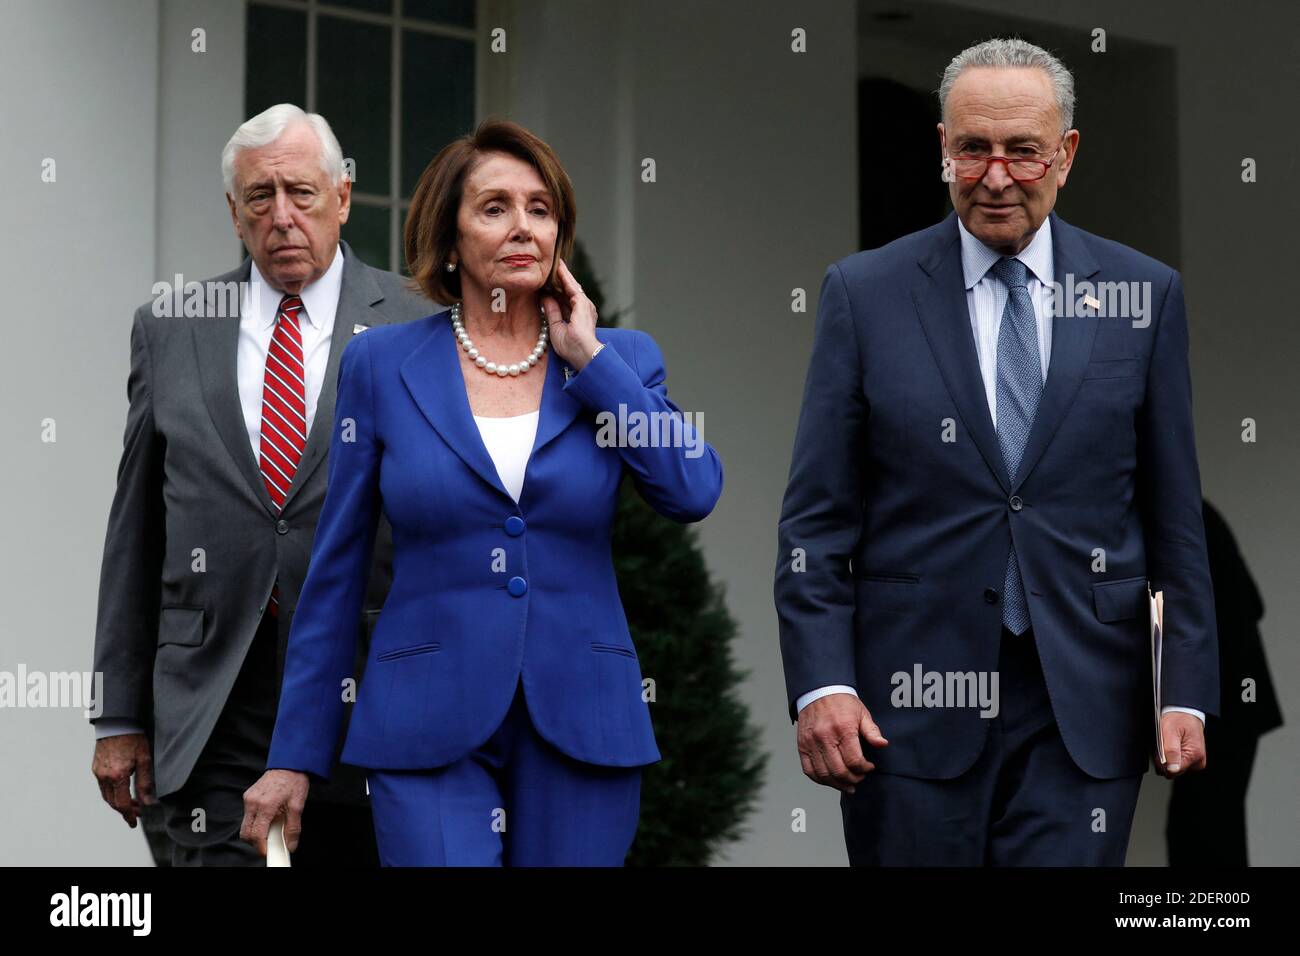 U.S. House Speaker Nancy Pelosi (D-CA) walk out with Senate Minority Leader Chuck Schumer (D-NY) and House Majority Leader Steny Hoyer (D-MD) (L) to speak with reporters after their meeting with President Donald Trump on the situation with Turkey at the White House in Washington on October 16, 2019. Photo by Yuri Gripas/ABACAPRESS.COM Stock Photo